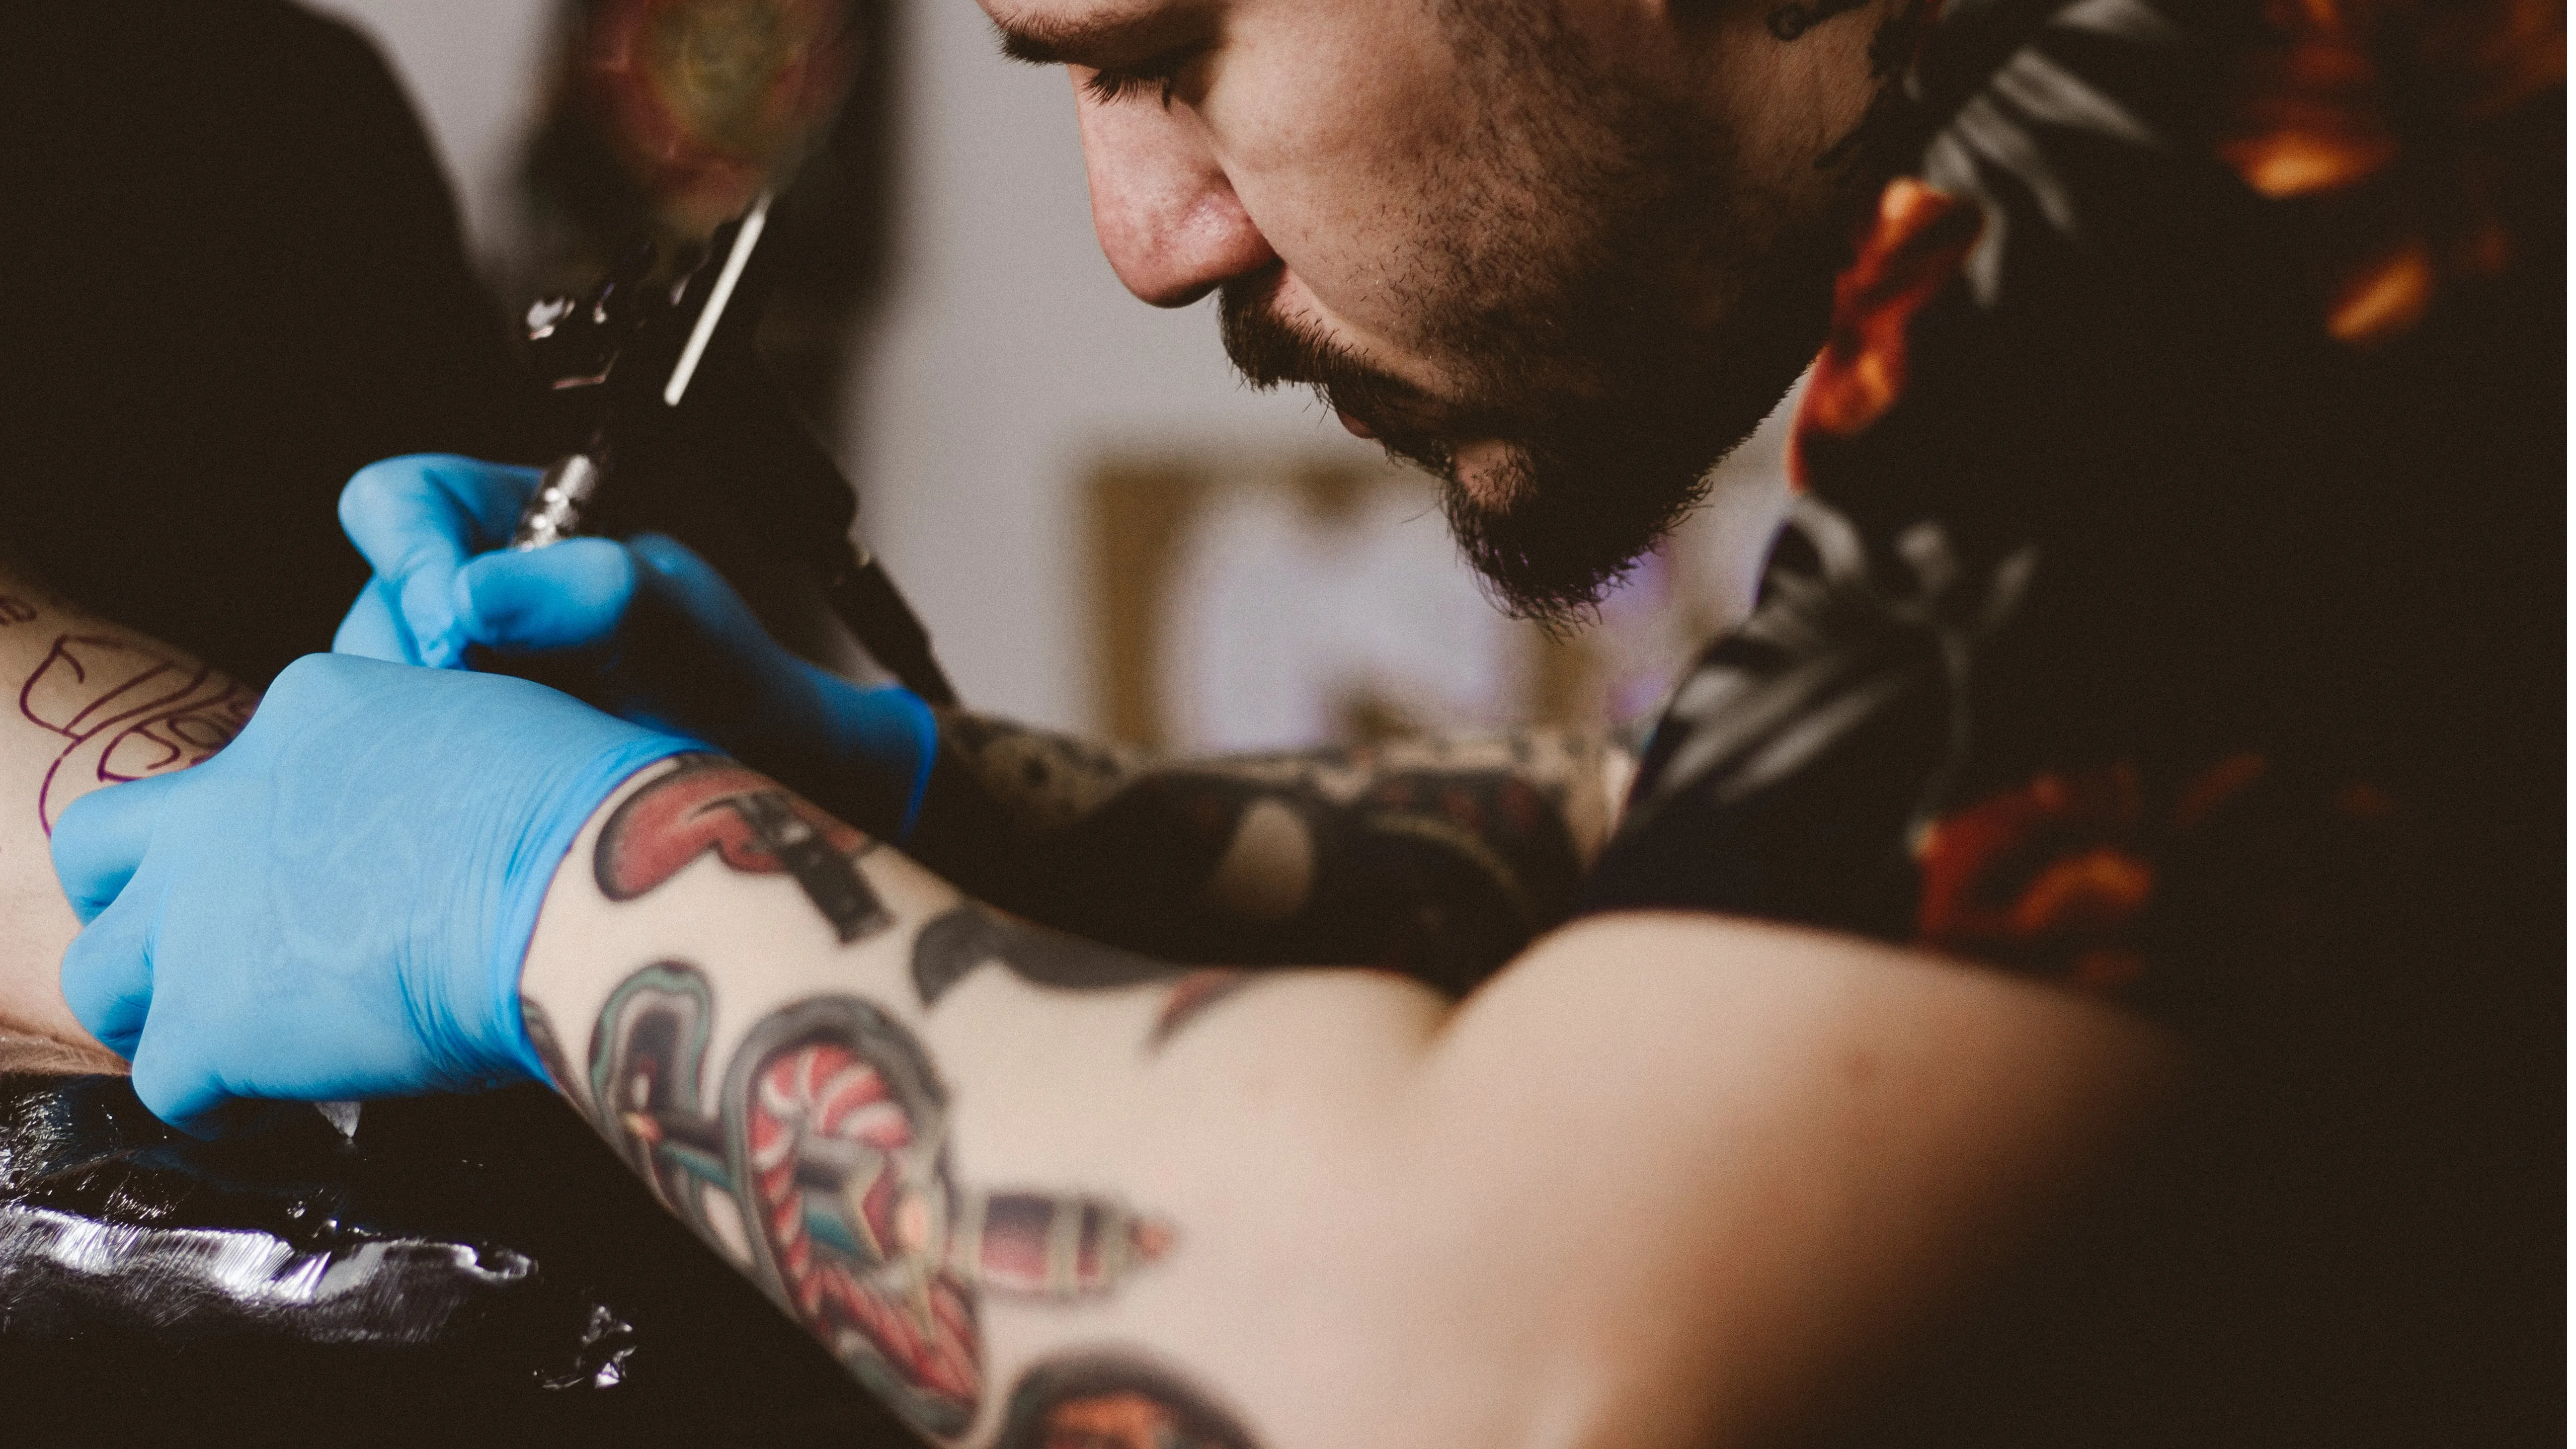 Thinking about getting inked? Go vegan